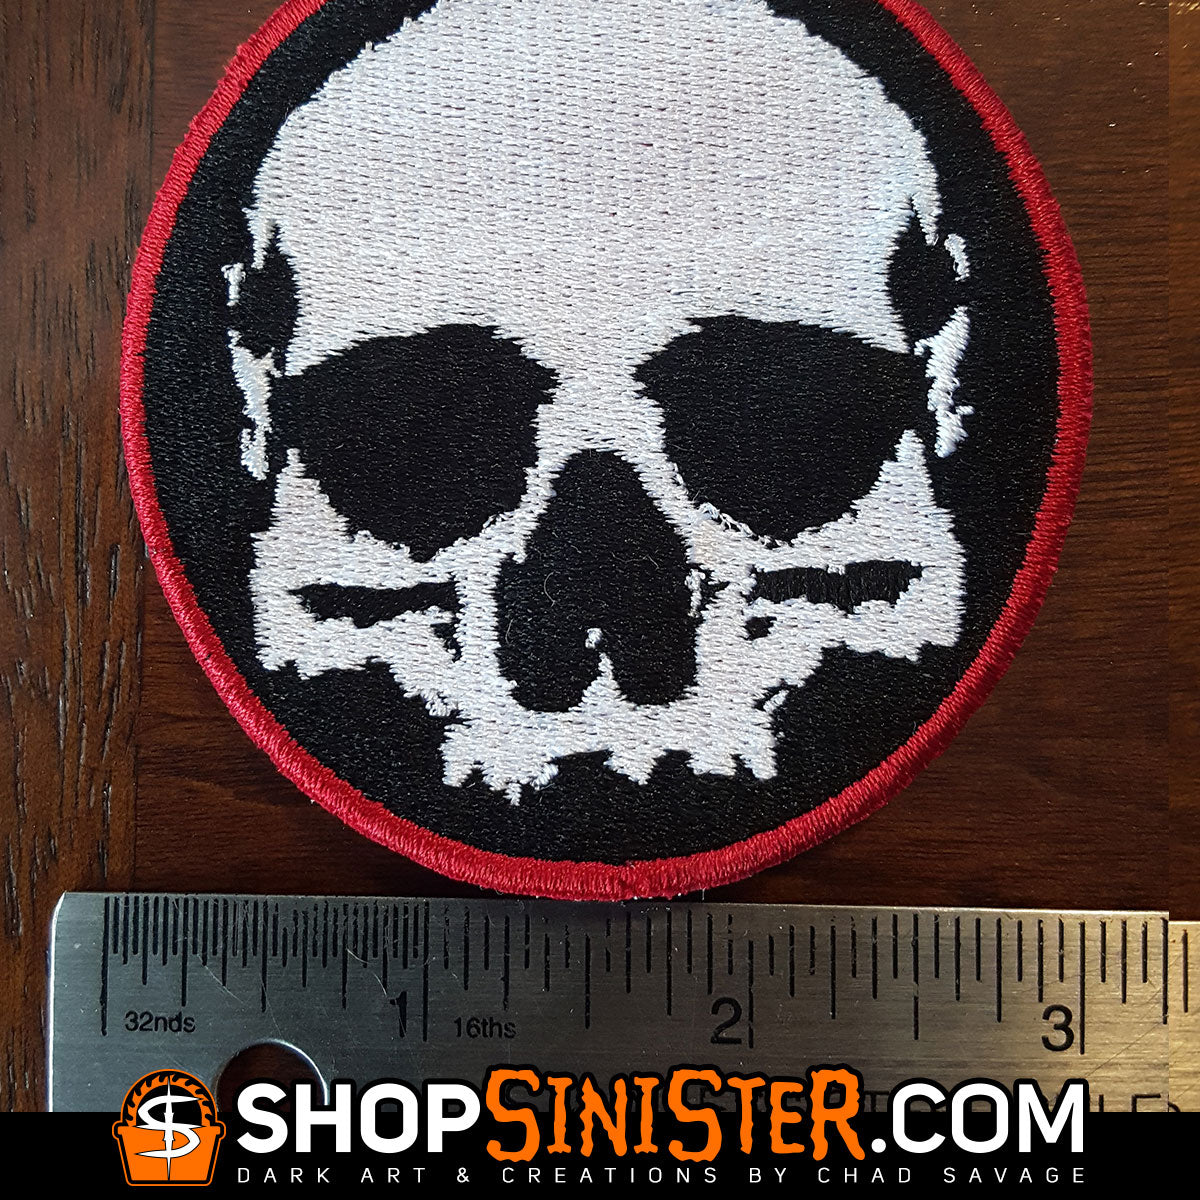 The Punisher 3 Skull Iron-On Patch